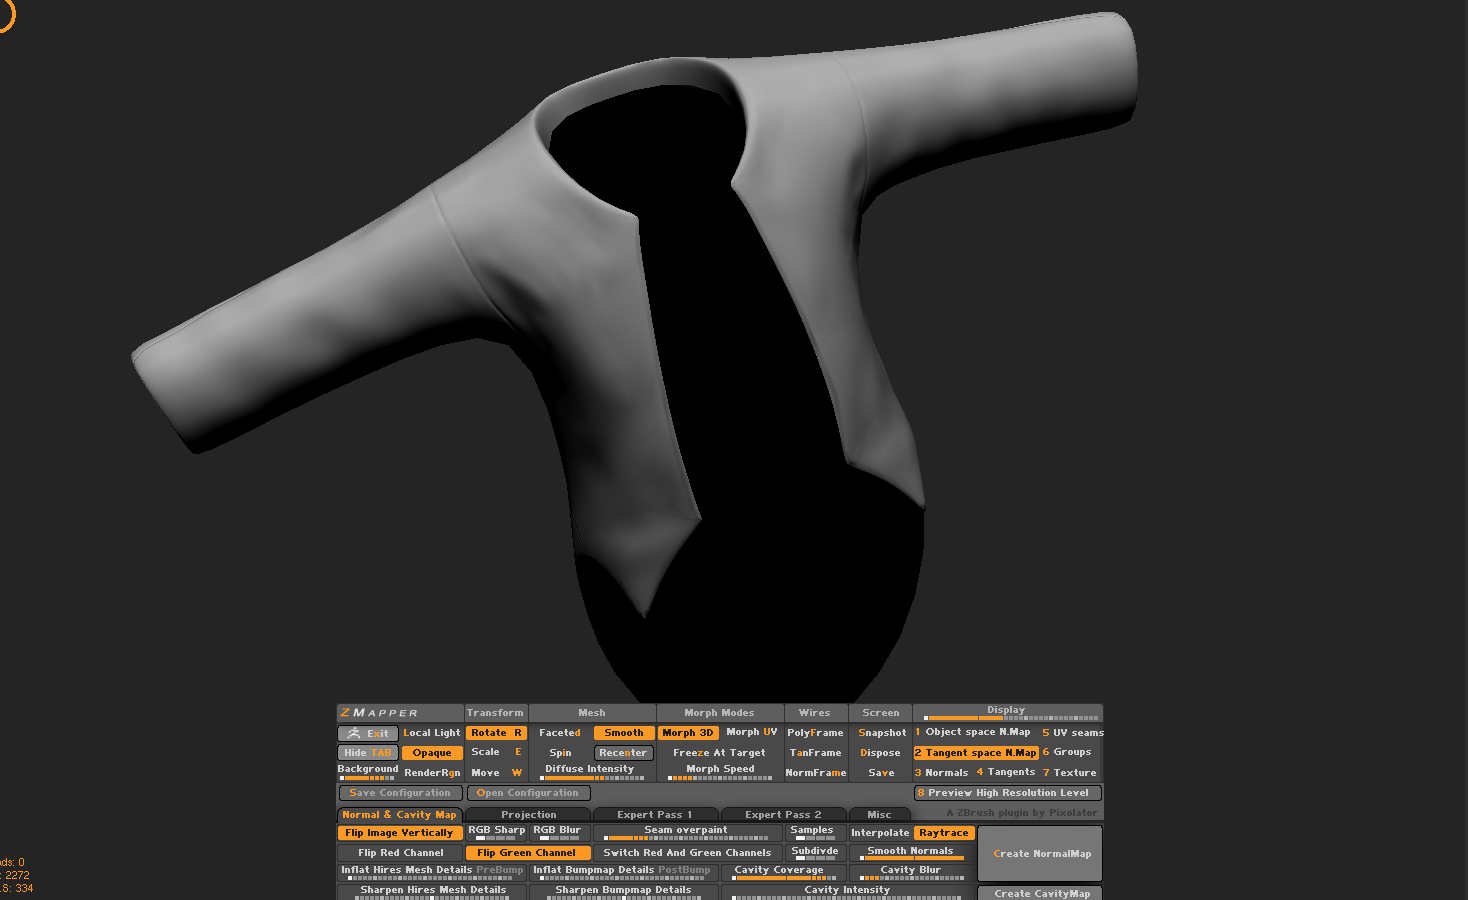 Zbrush to 3dmax Normal Map Render Error - ZBrushCentral